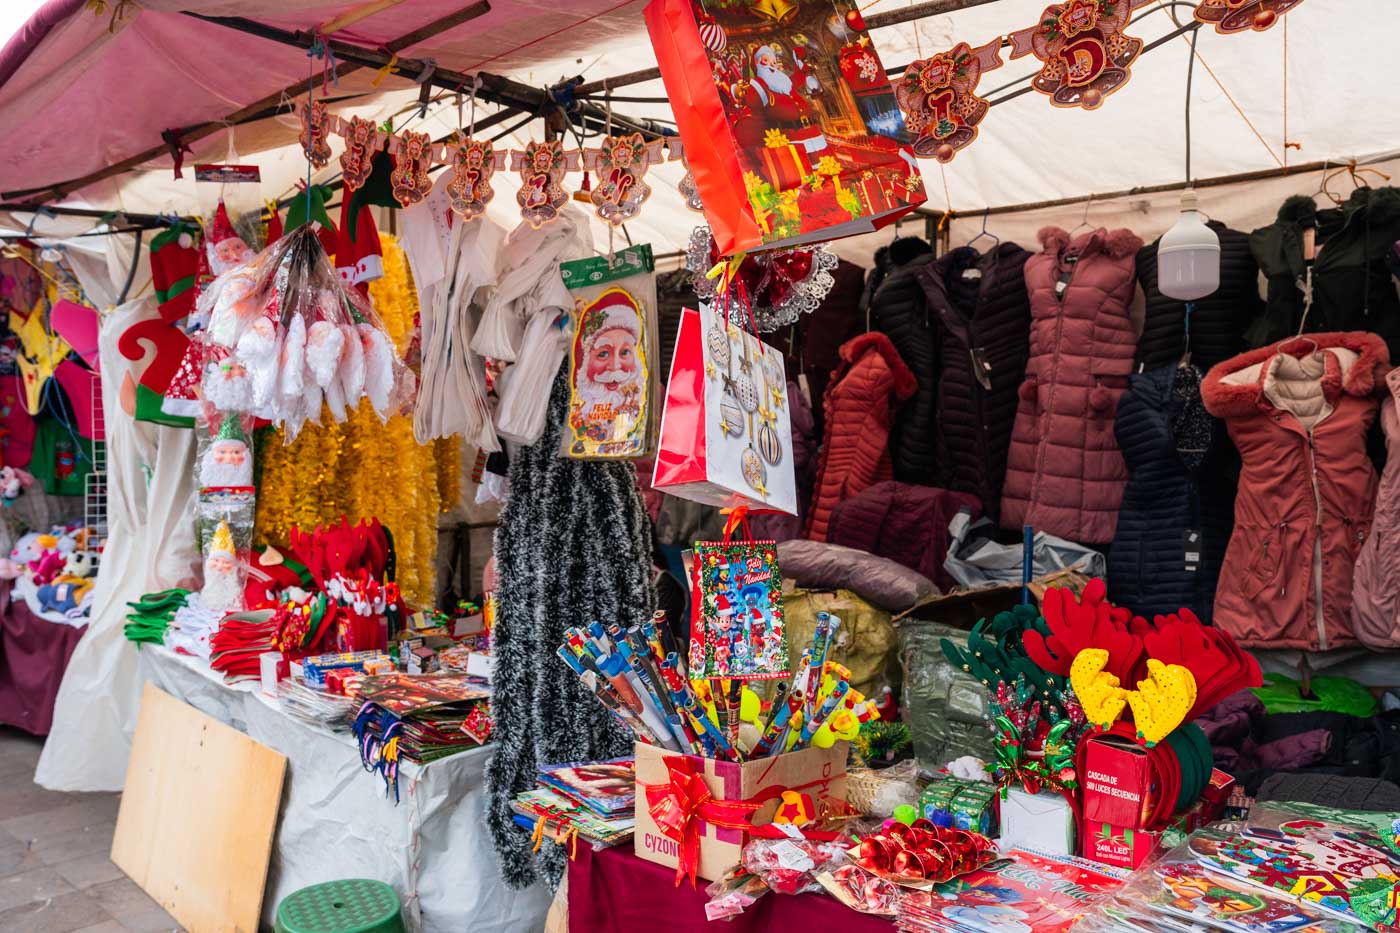 A stall outside of Mercado San Pedro selling coats, Christmas decorations and other trinkets.